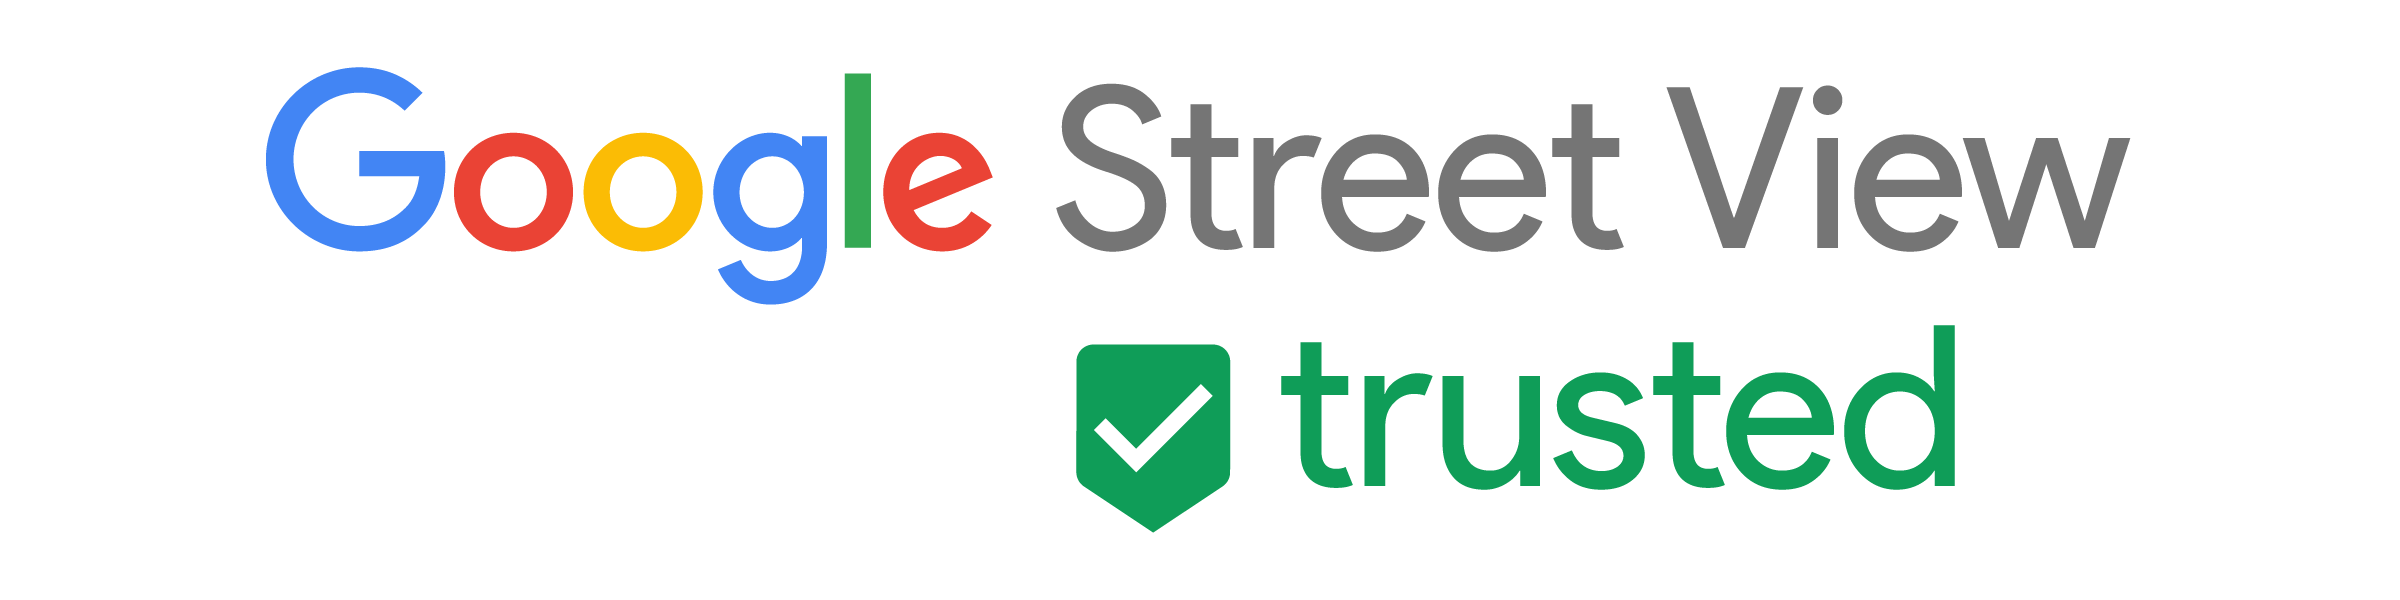 Trusted Logo - Aggles360 Street View|Trusted Photographer